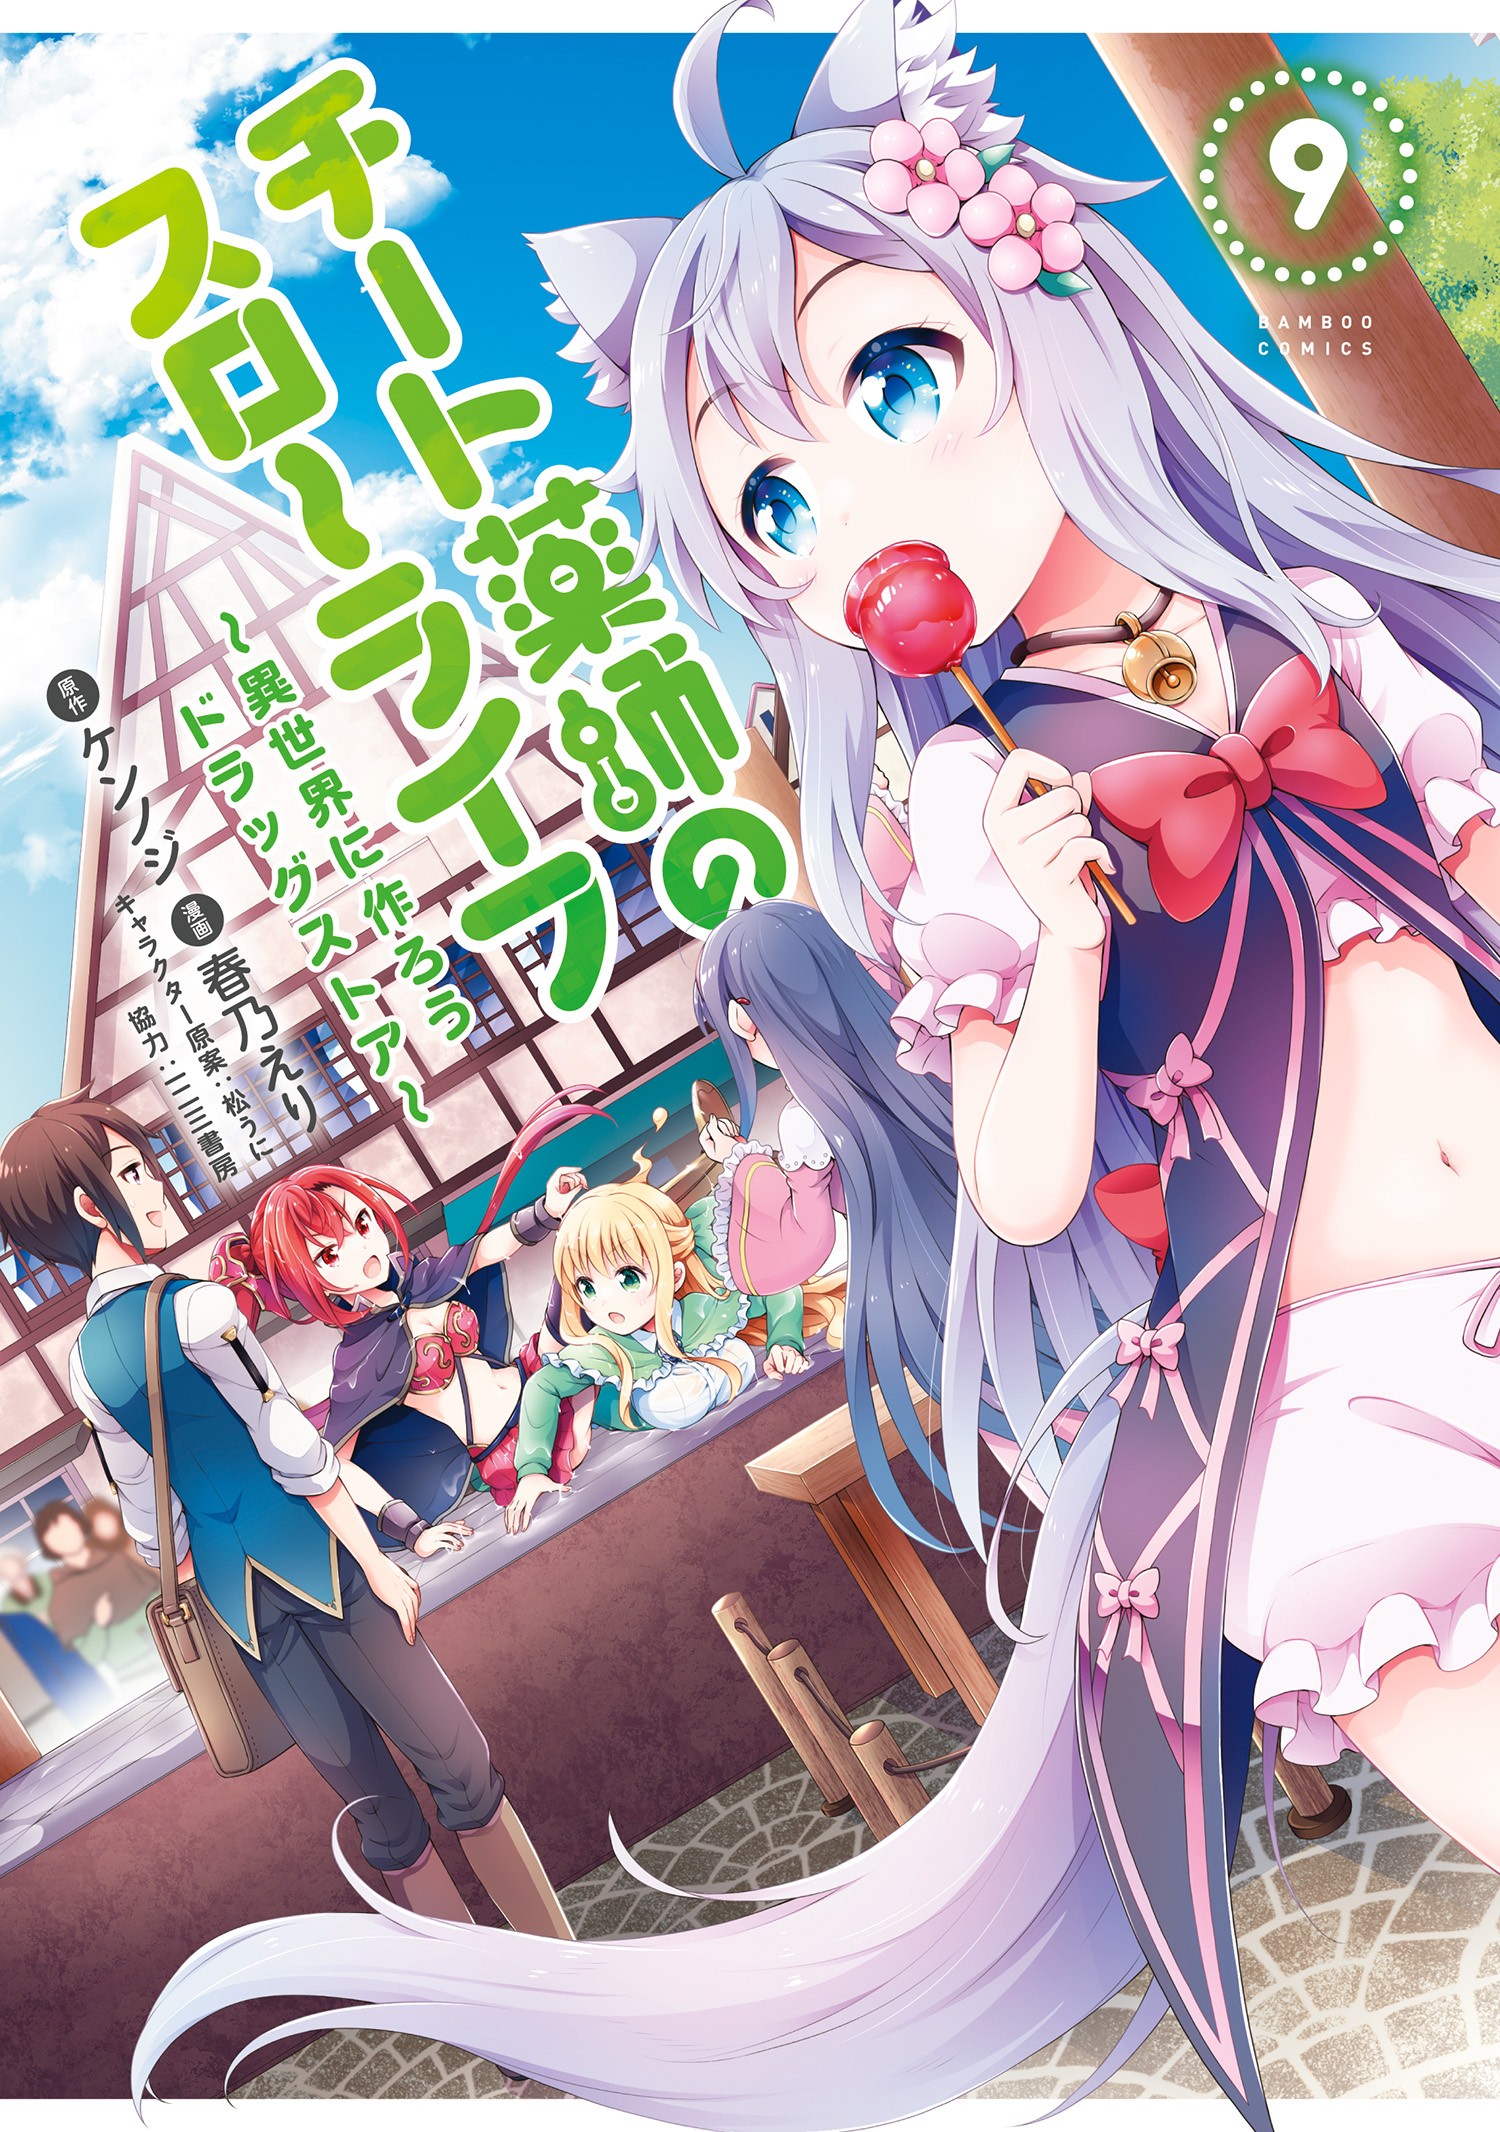 Isekai Cheat Magician Episode 1 Discussion (50 - ) - Forums